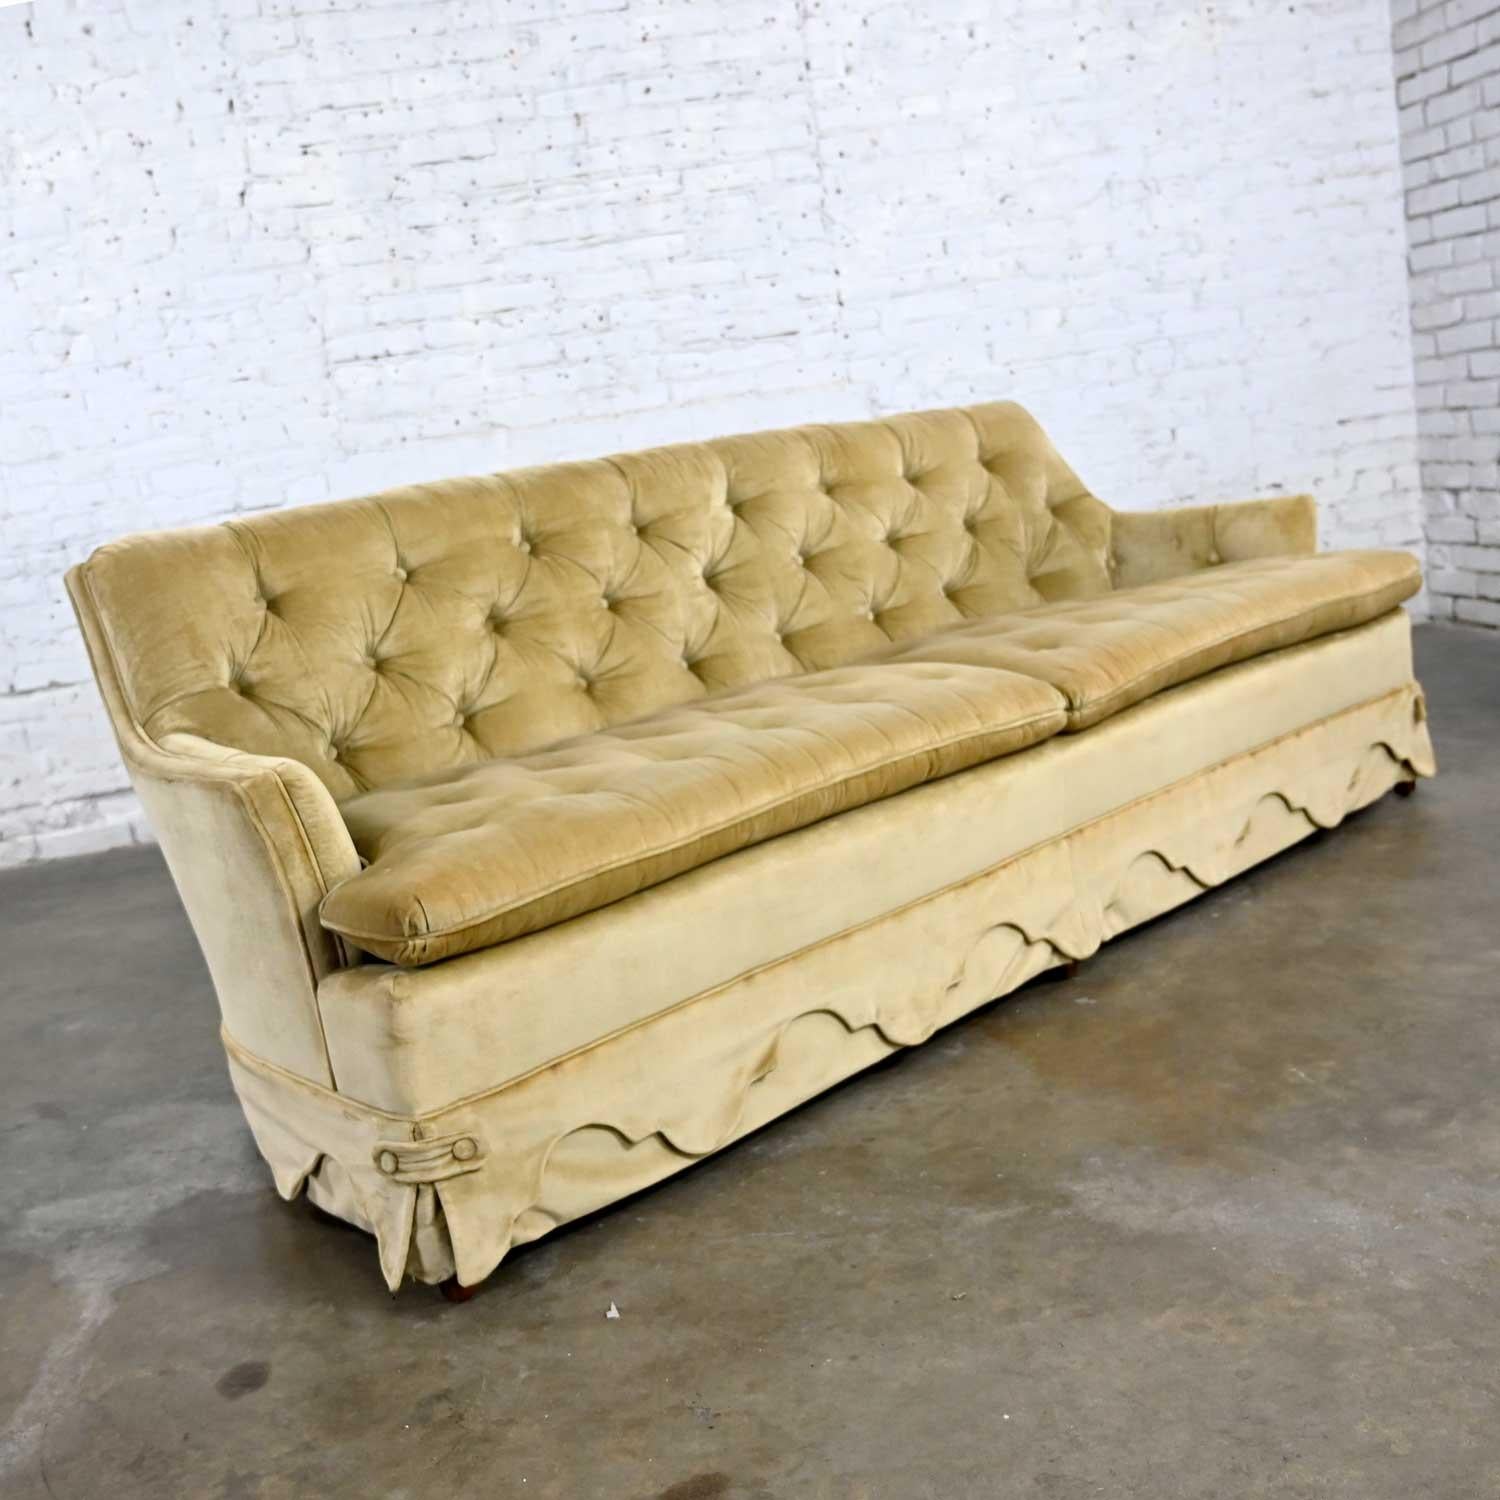 Wonderful vintage Hollywood Regency style tawny-colored button tufted velvet sofa by Heritage. Beautiful condition, keeping in mind that this is vintage and not new so will have signs of use and wear. It has been professionally shampooed and several